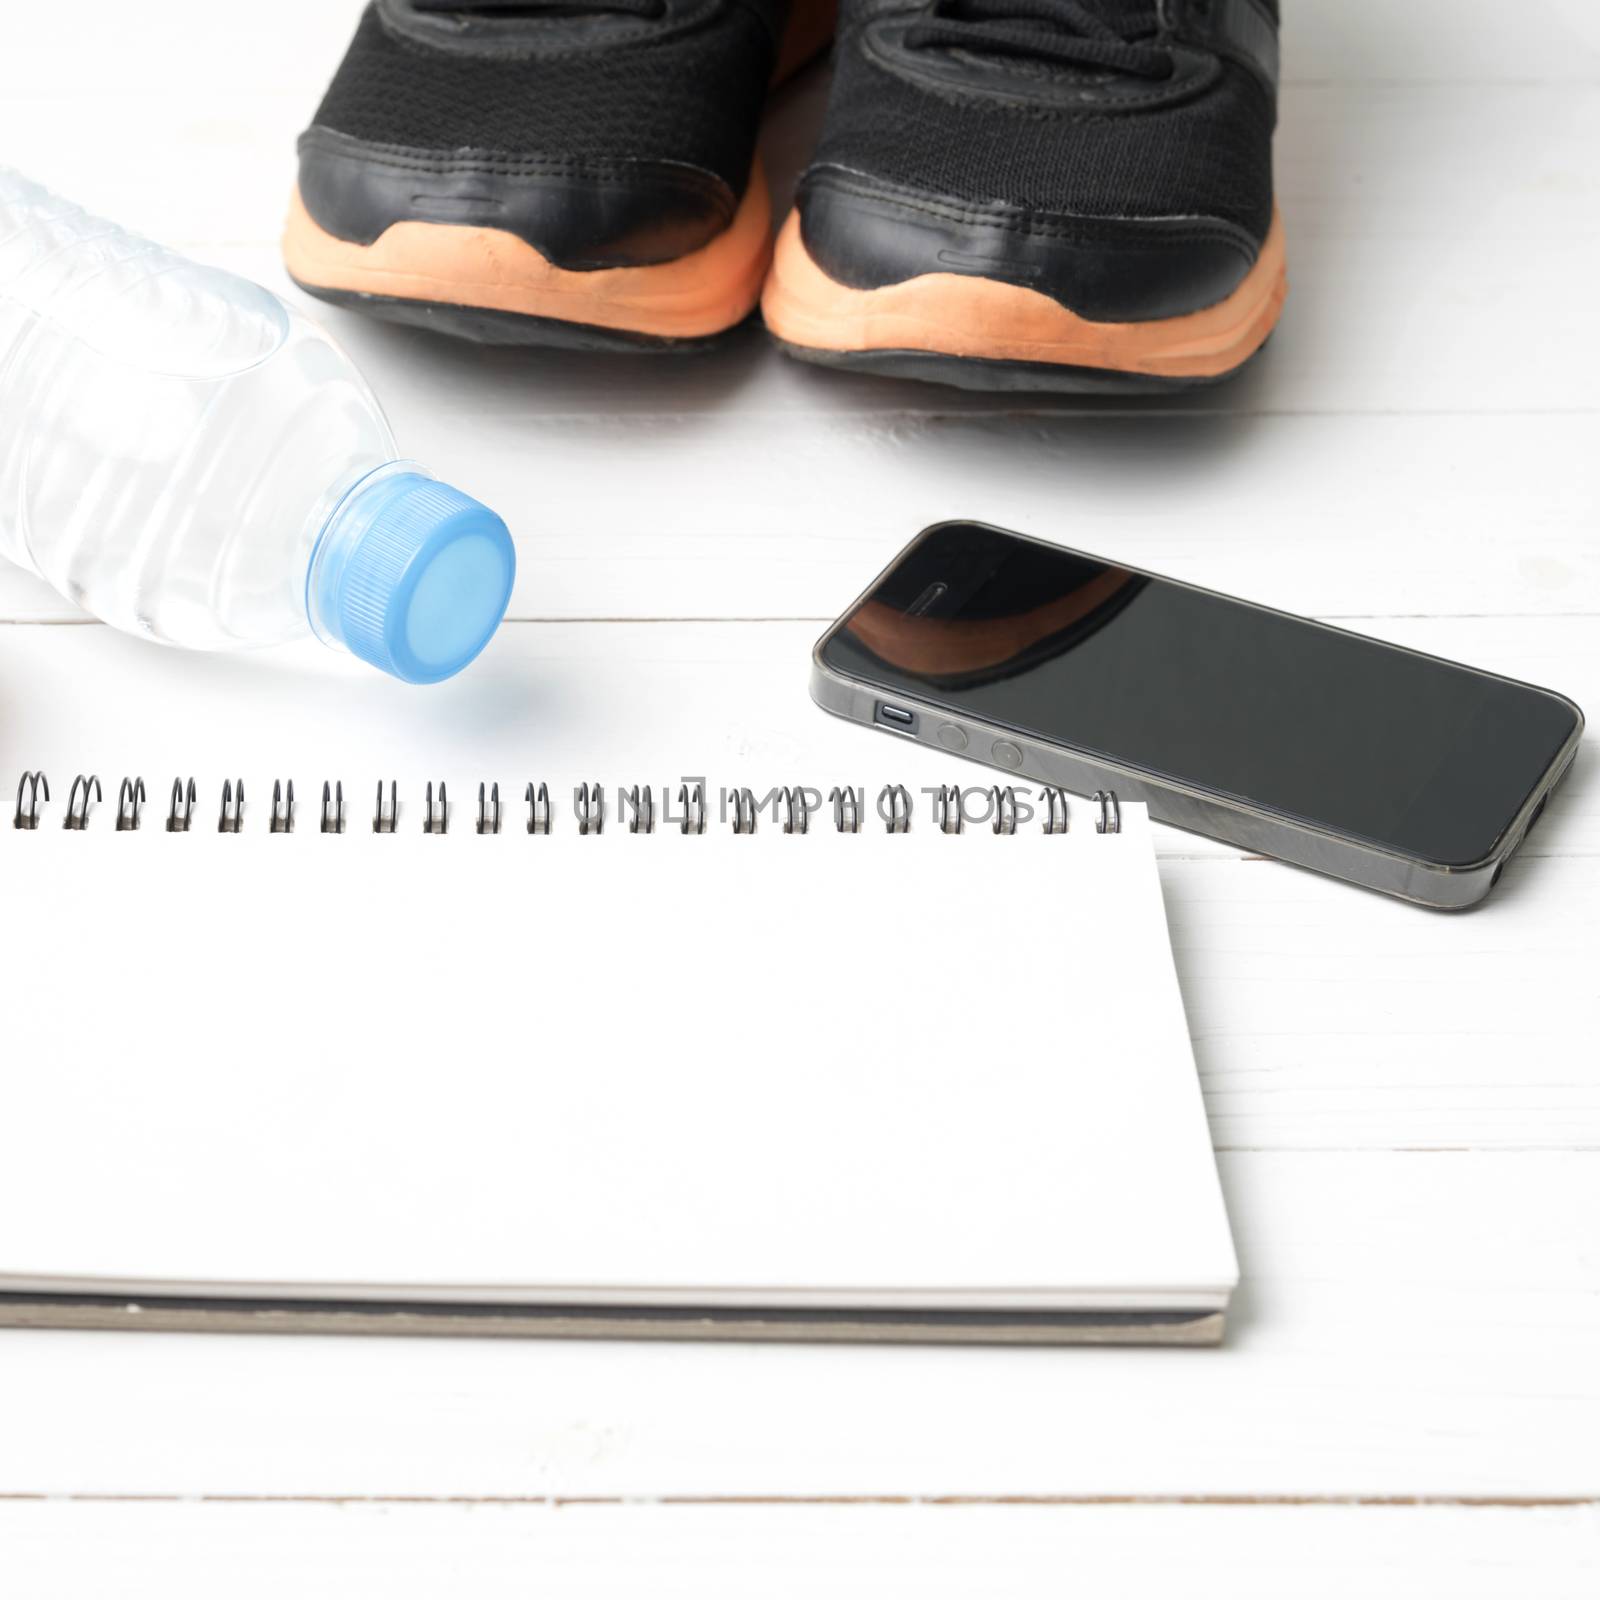 fitness equipment : running shoes,drinking water,notebook and phone on white wood table